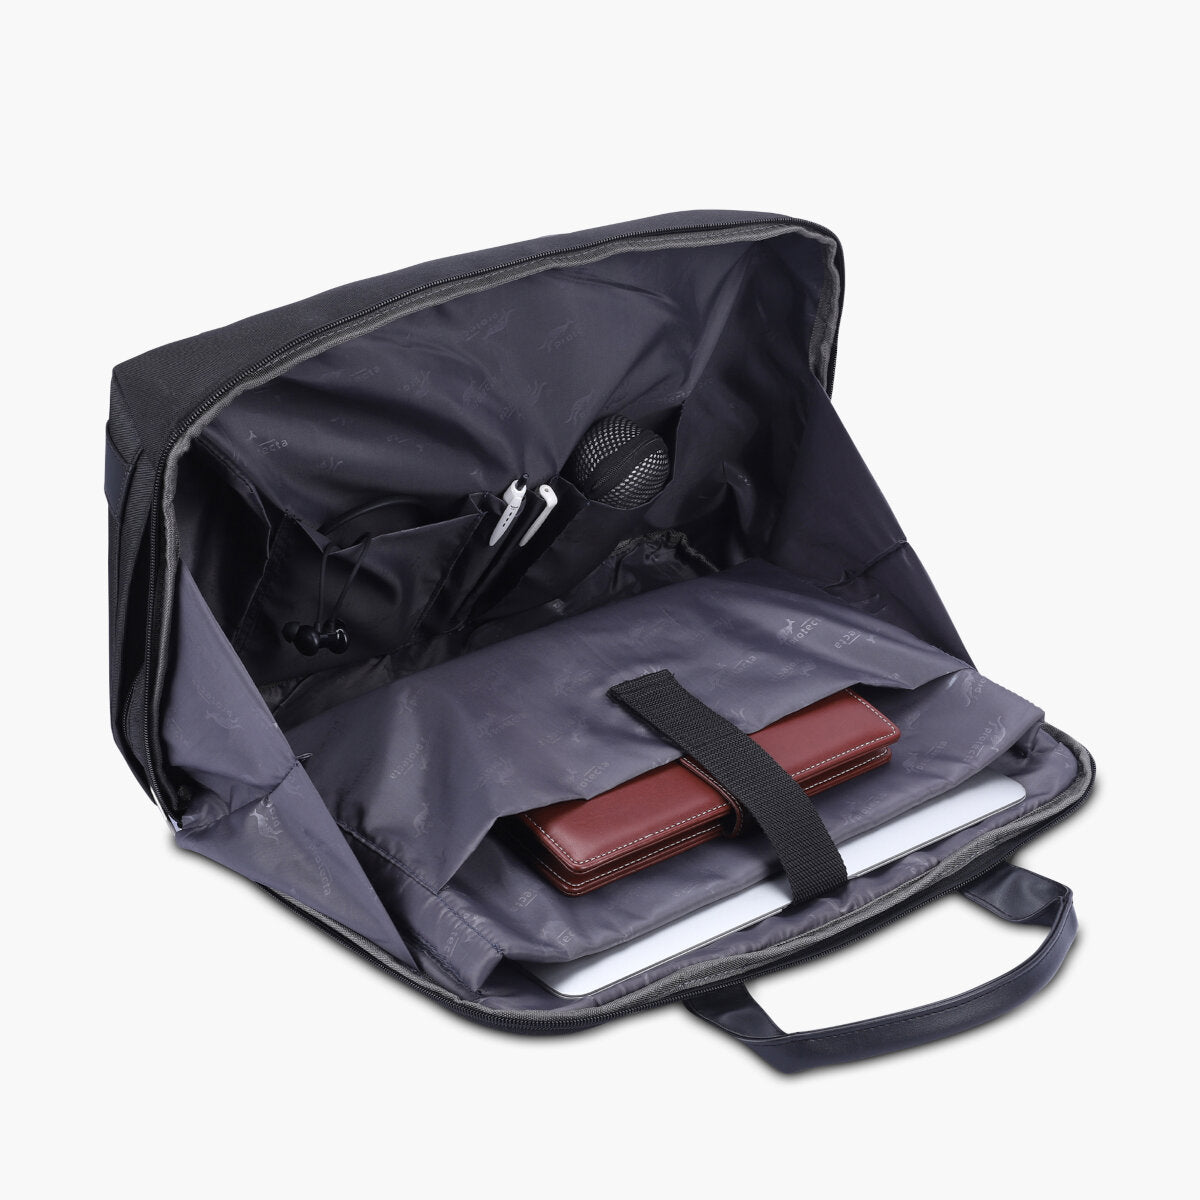 Black | Protecta Early Lead Anti-Theft Office Laptop Bag - 1